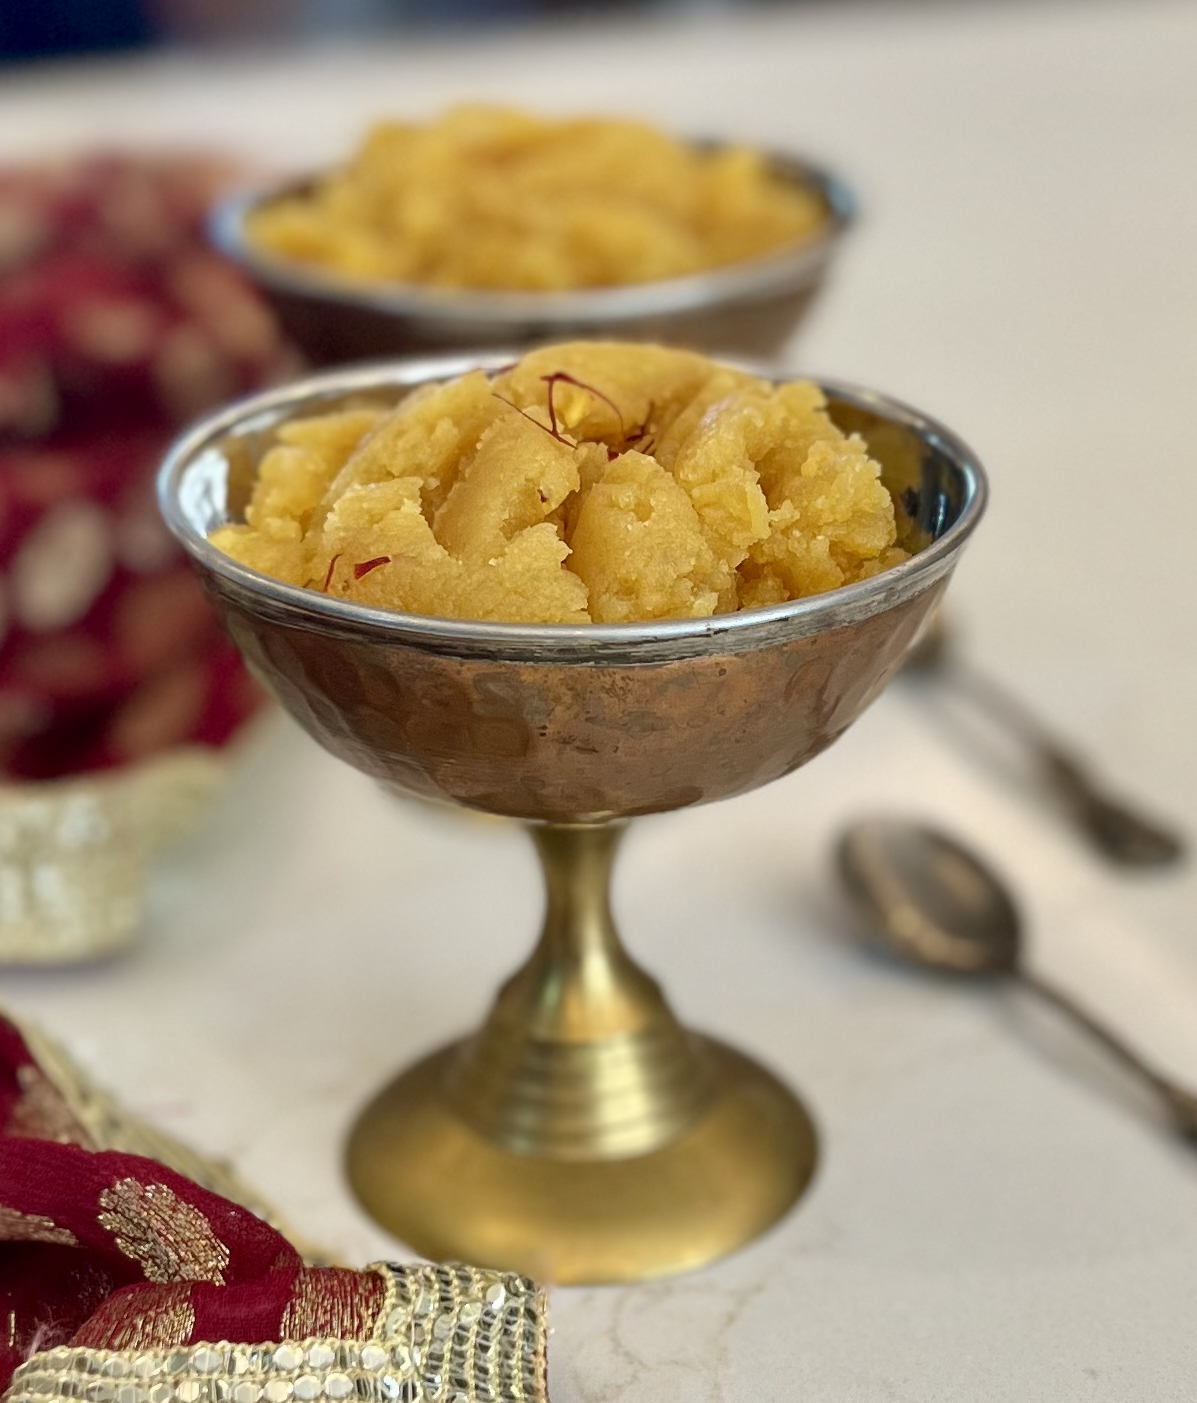 Authentic Moong Dal Halwa Recipe: Step-by-Step Guide to Make Delicious Indian Dessert